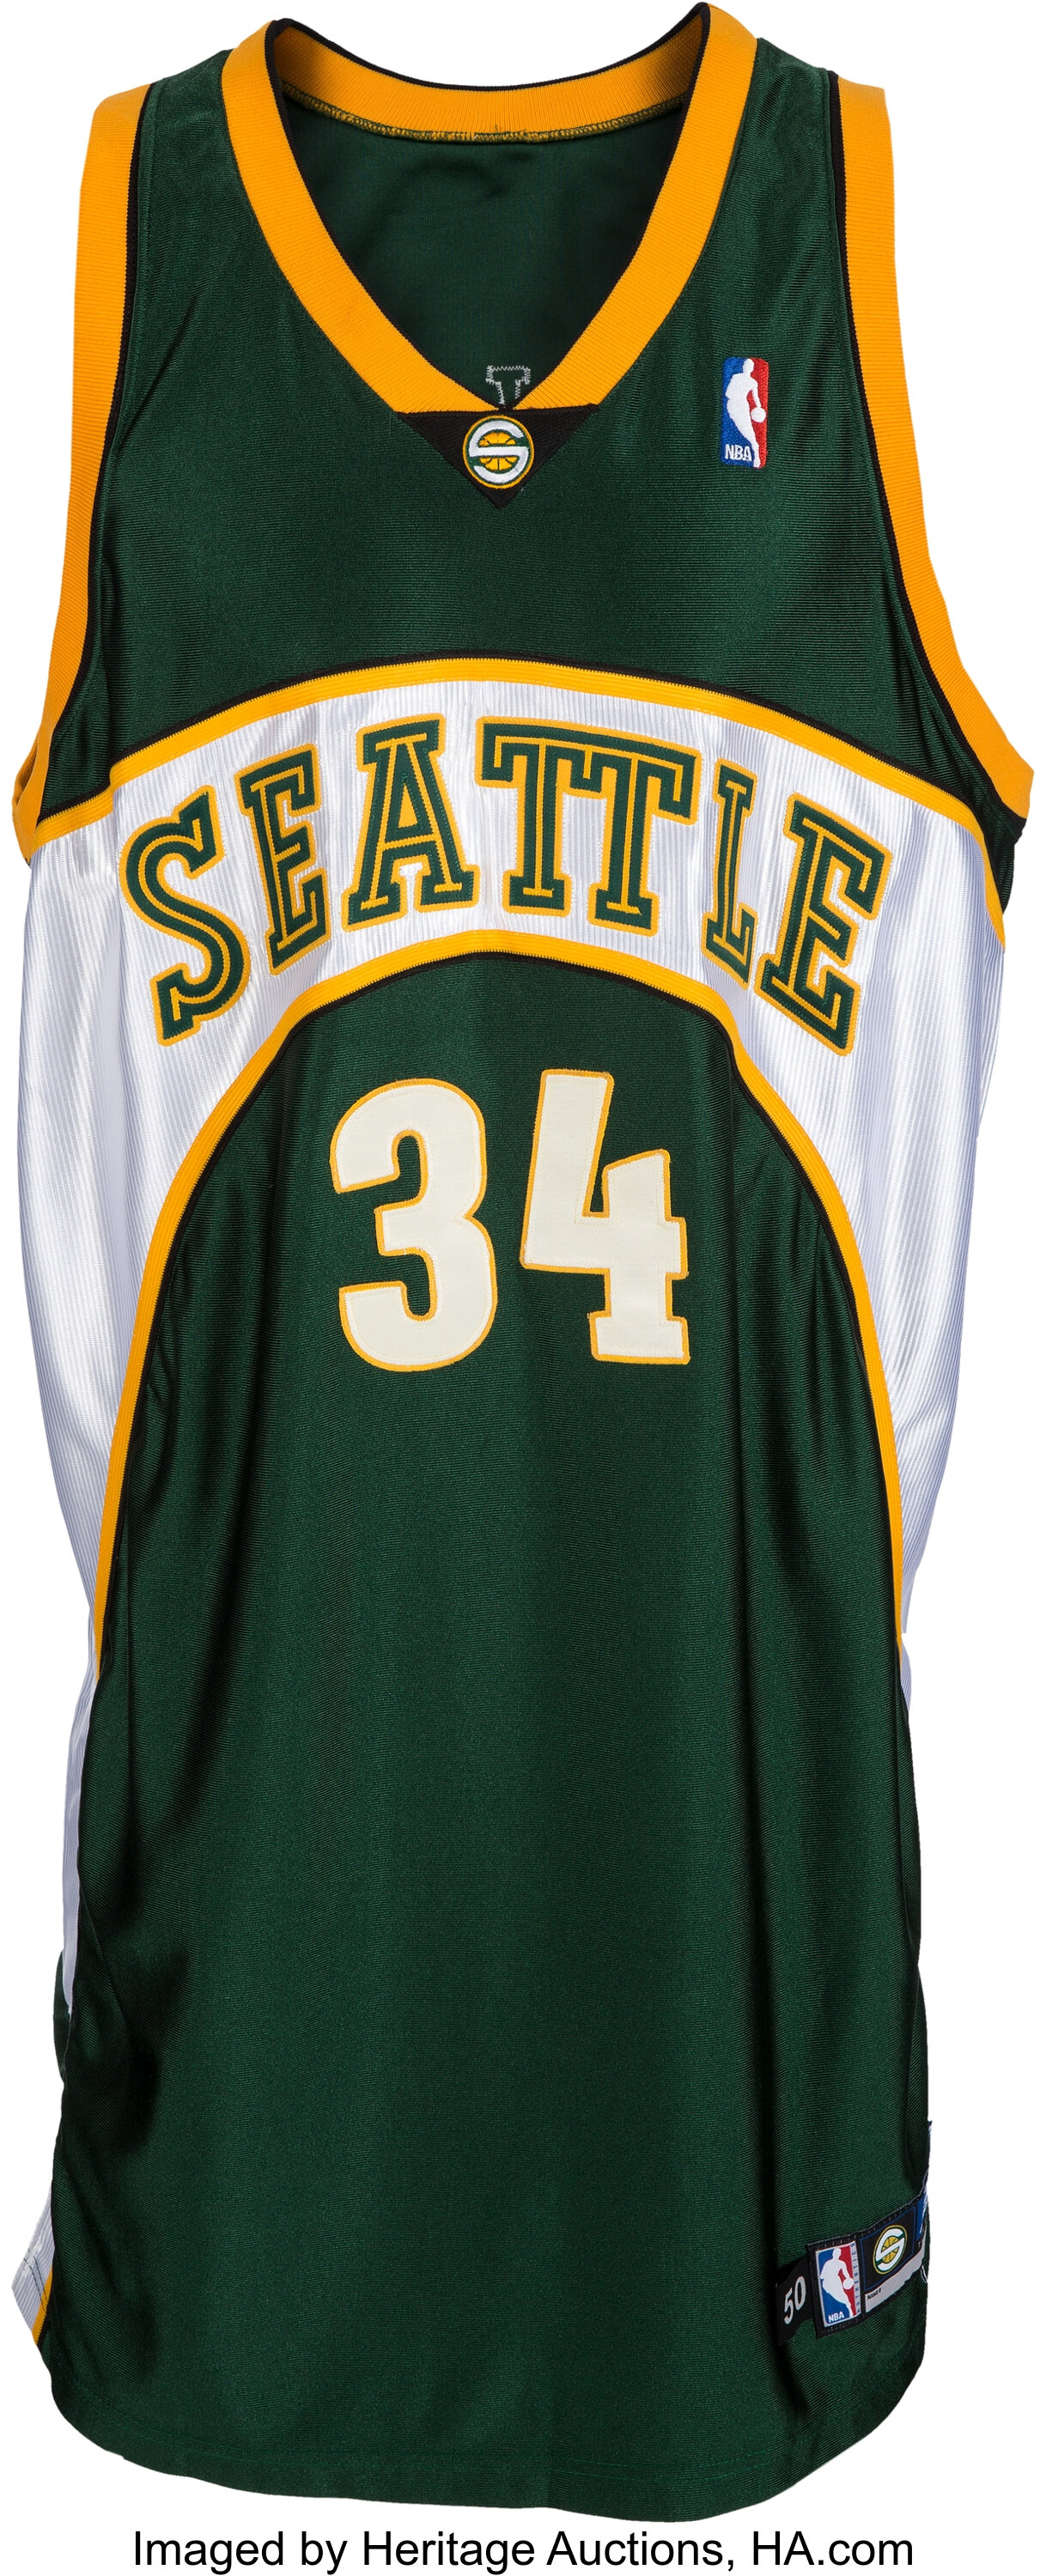 Ray Allen Seattle Supersonics Authentic Game Jersey